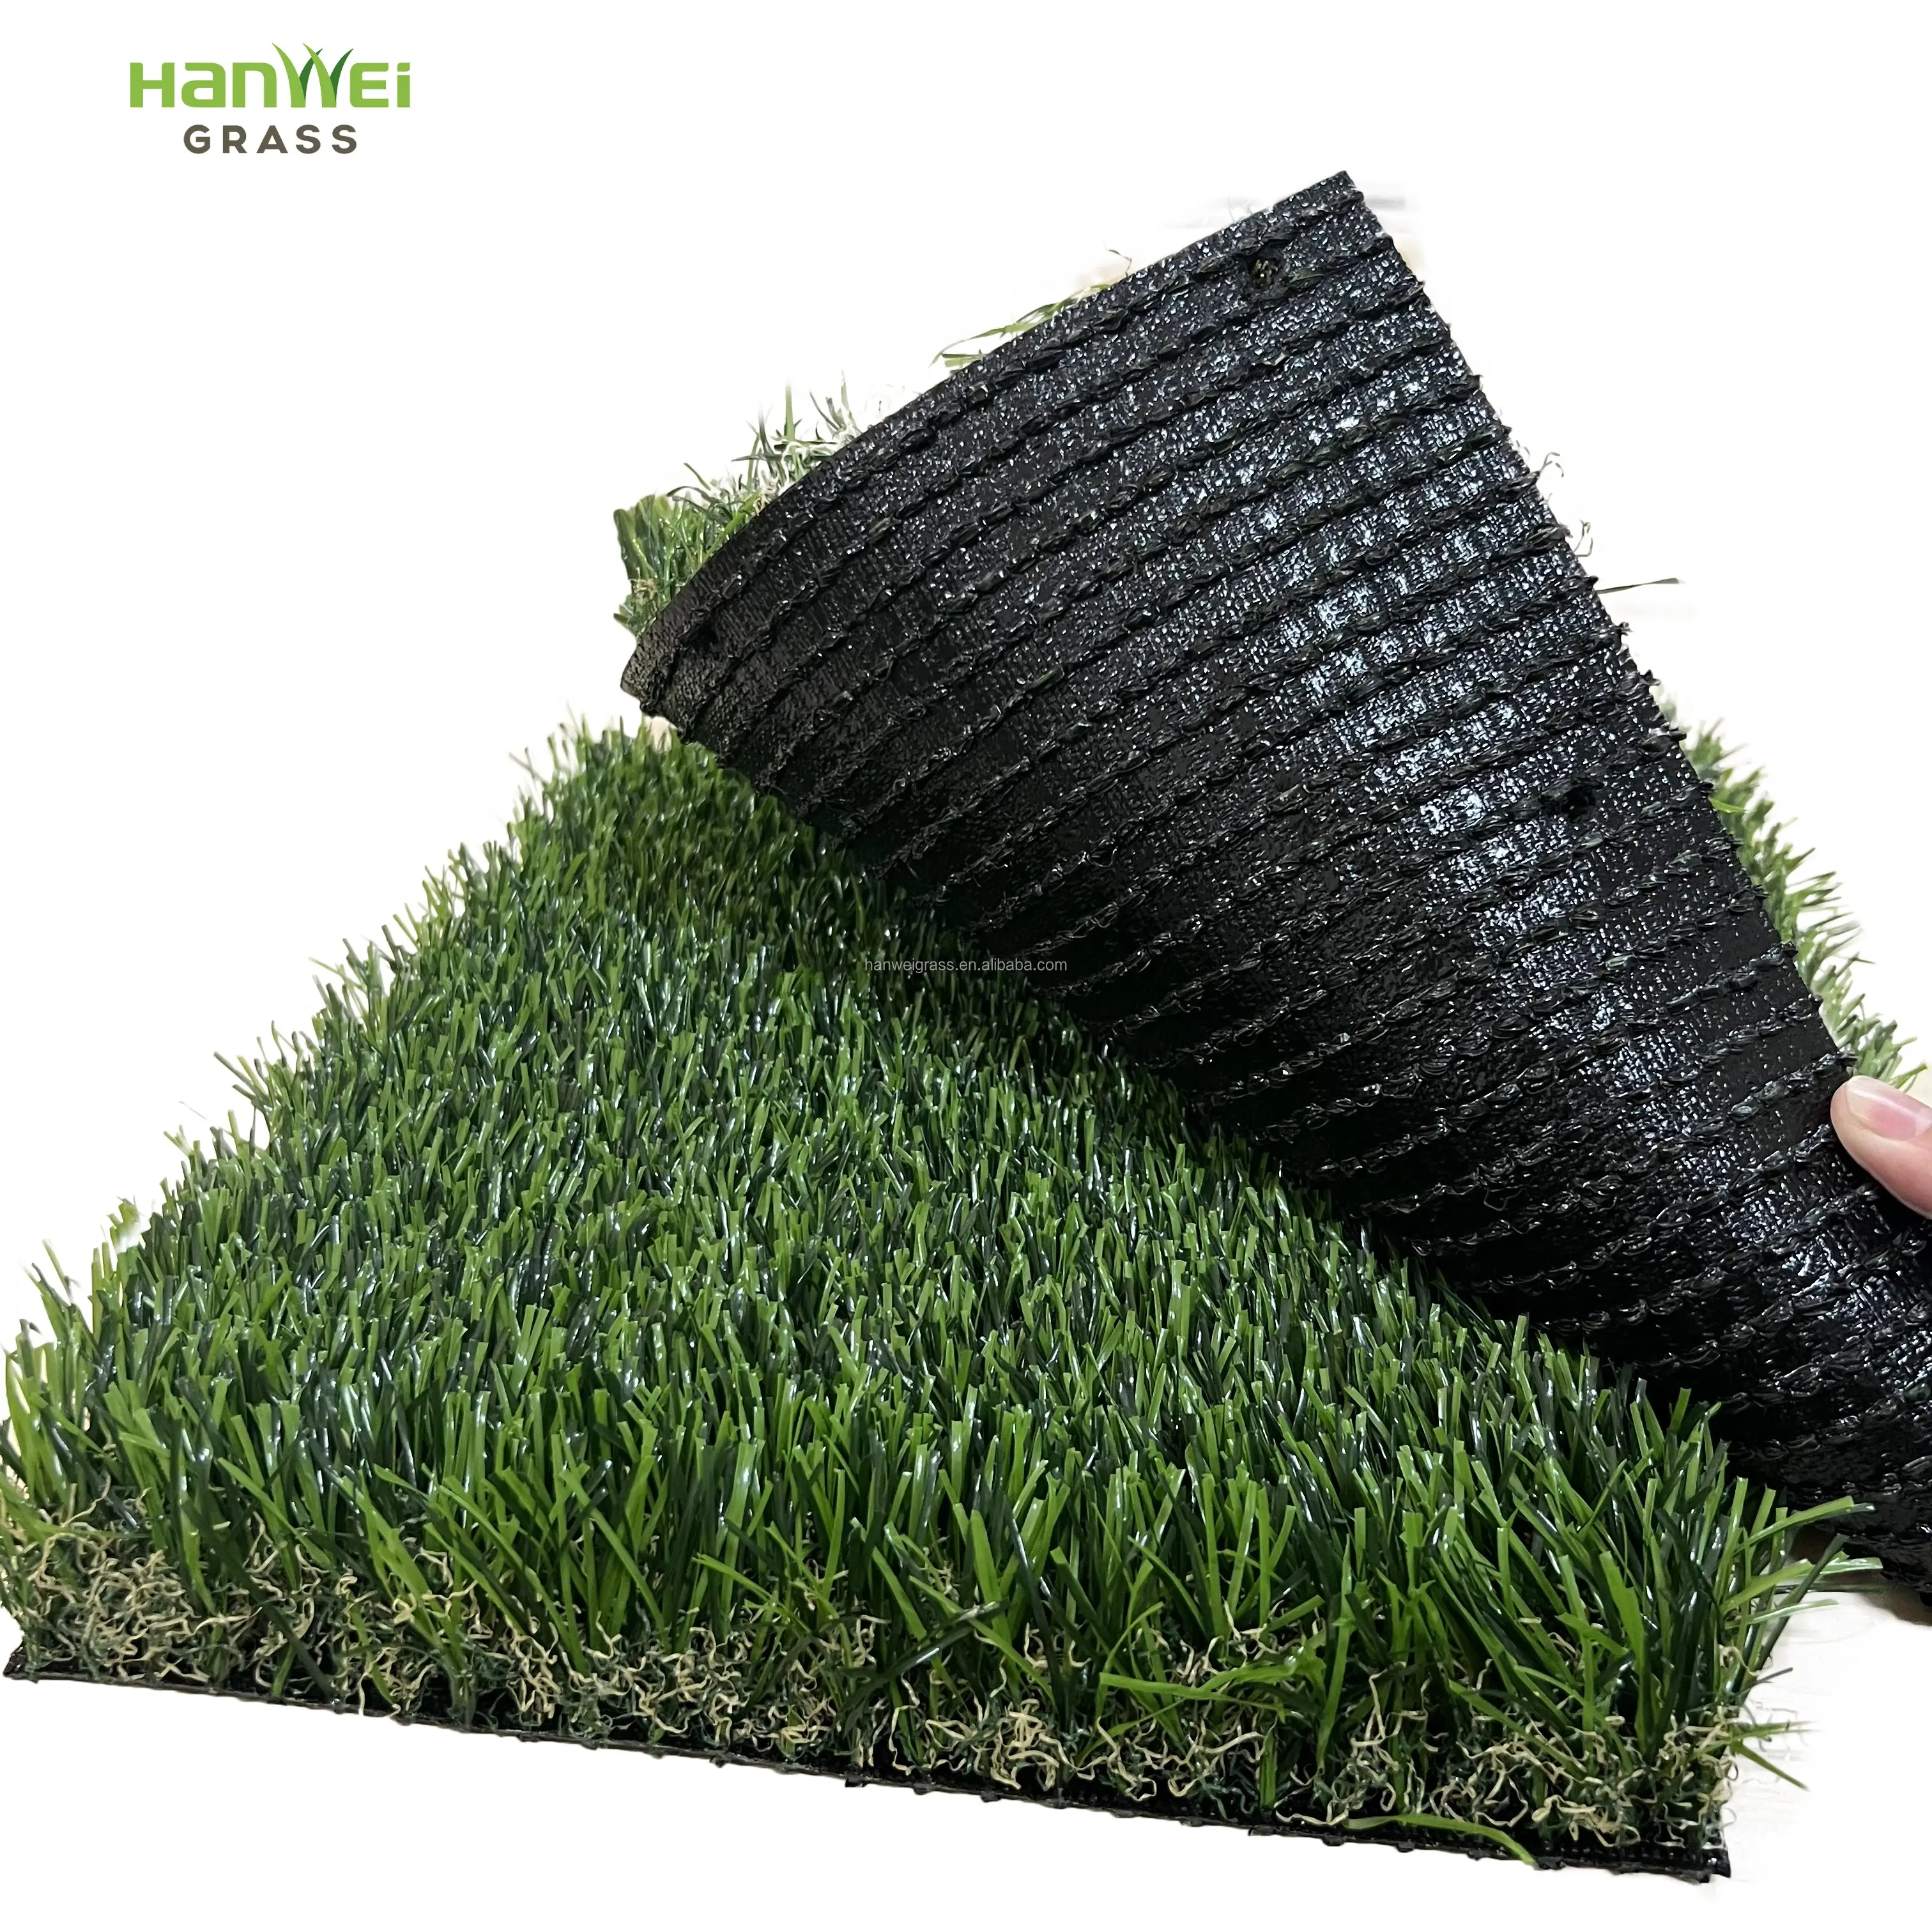 Hanwei New Products Artificial Grass Rug Synthetic Turf Fake Garden Lawn Carpet Mat Indoor outdoor for United States